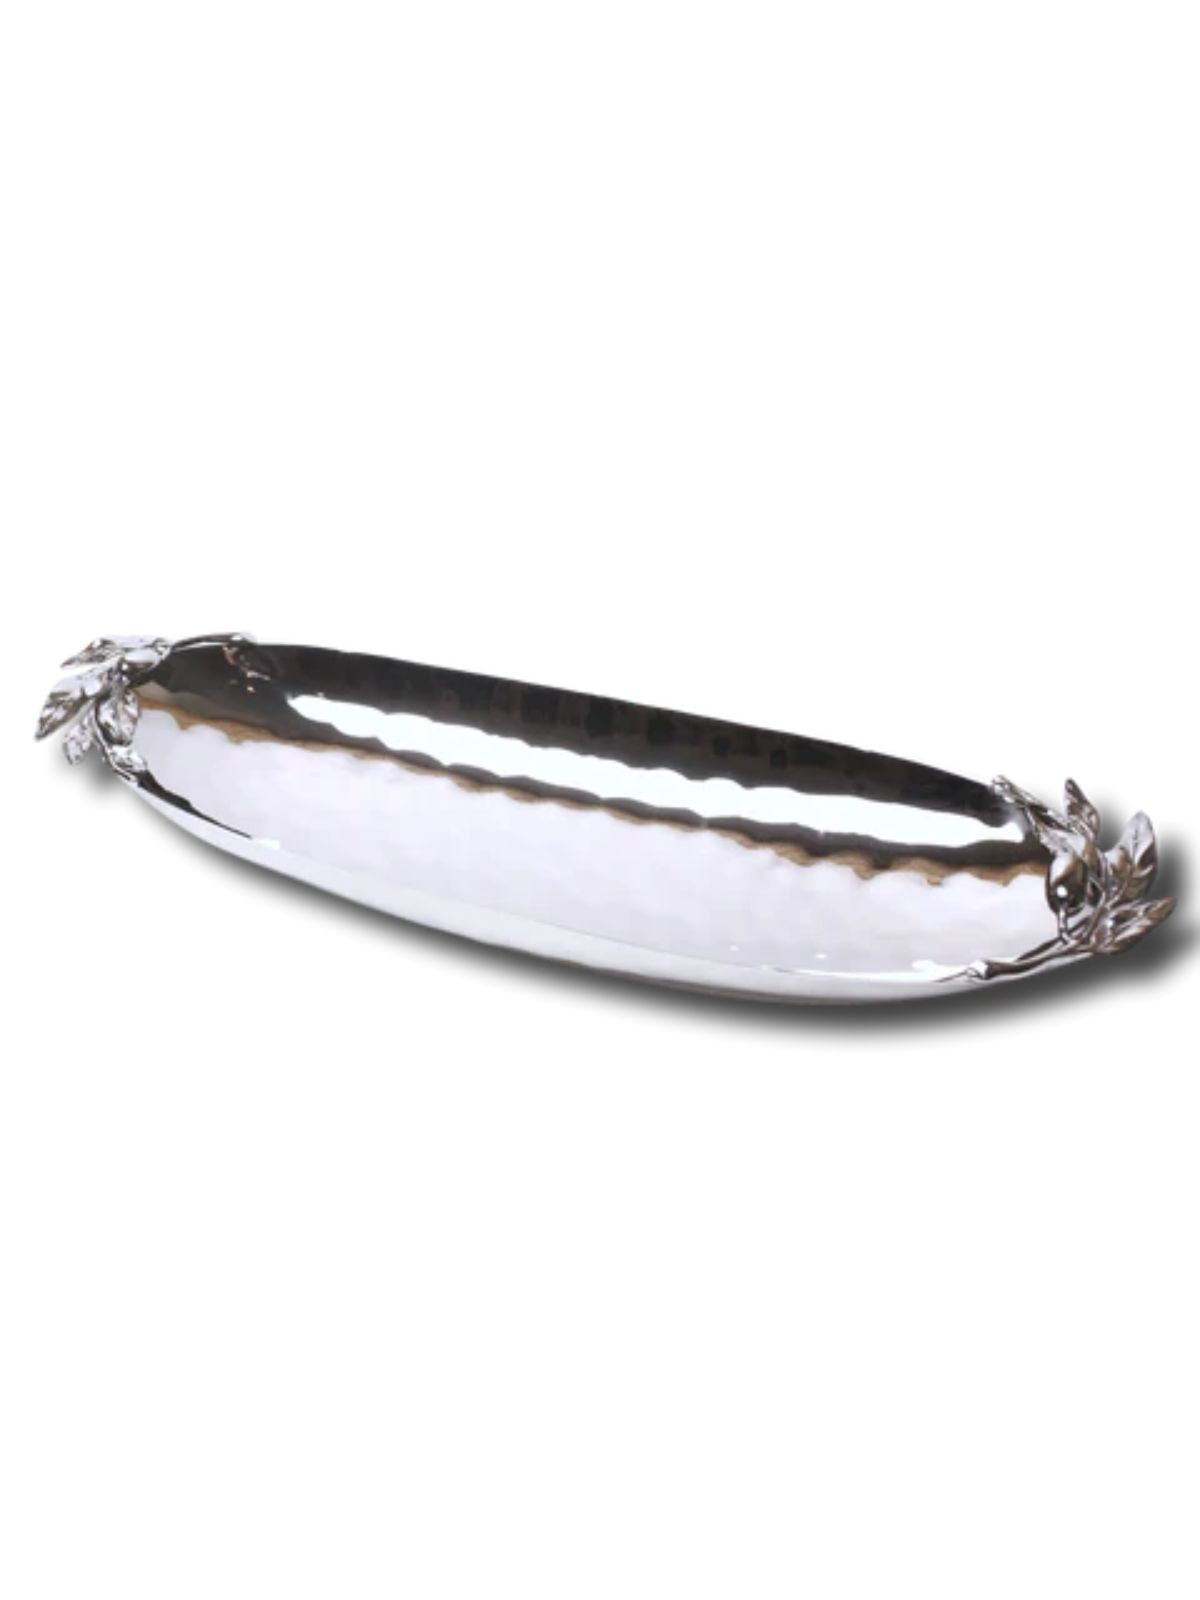 Stainless Steel Coupe Tray with Olive Leaf Design, 17.5L inches.